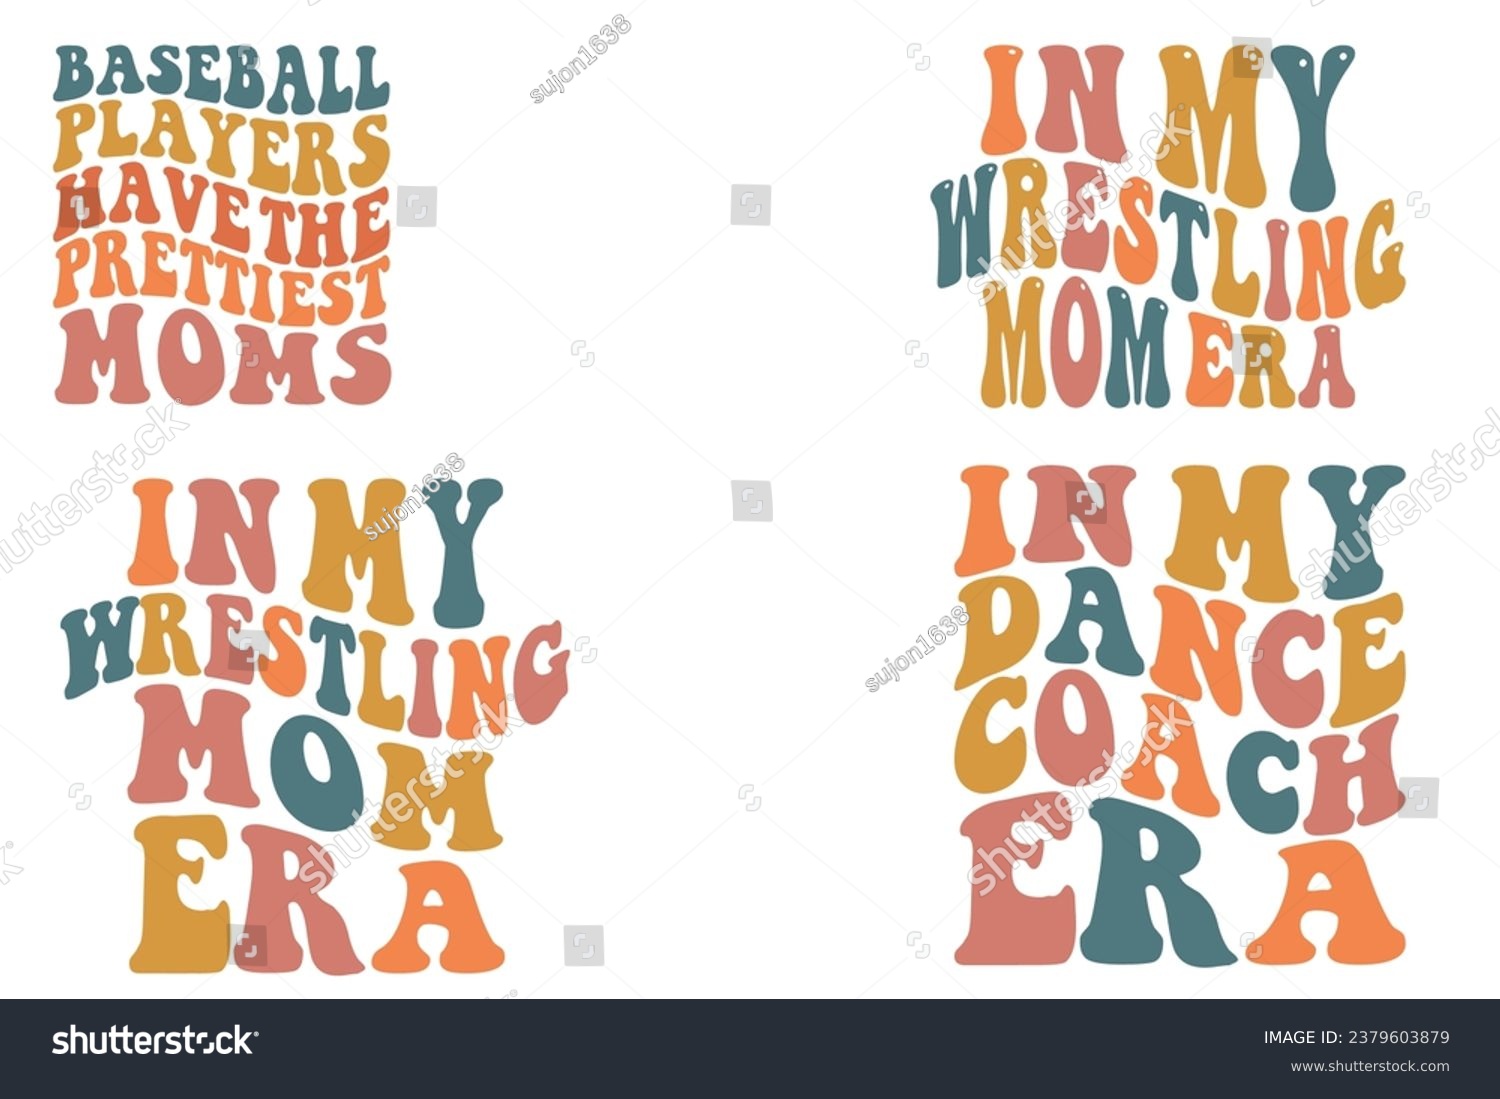 SVG of  Baseball players have the prettiest moms, In My Wrestling Mom Era, In My Dance Coach Era retro way T-shirt svg